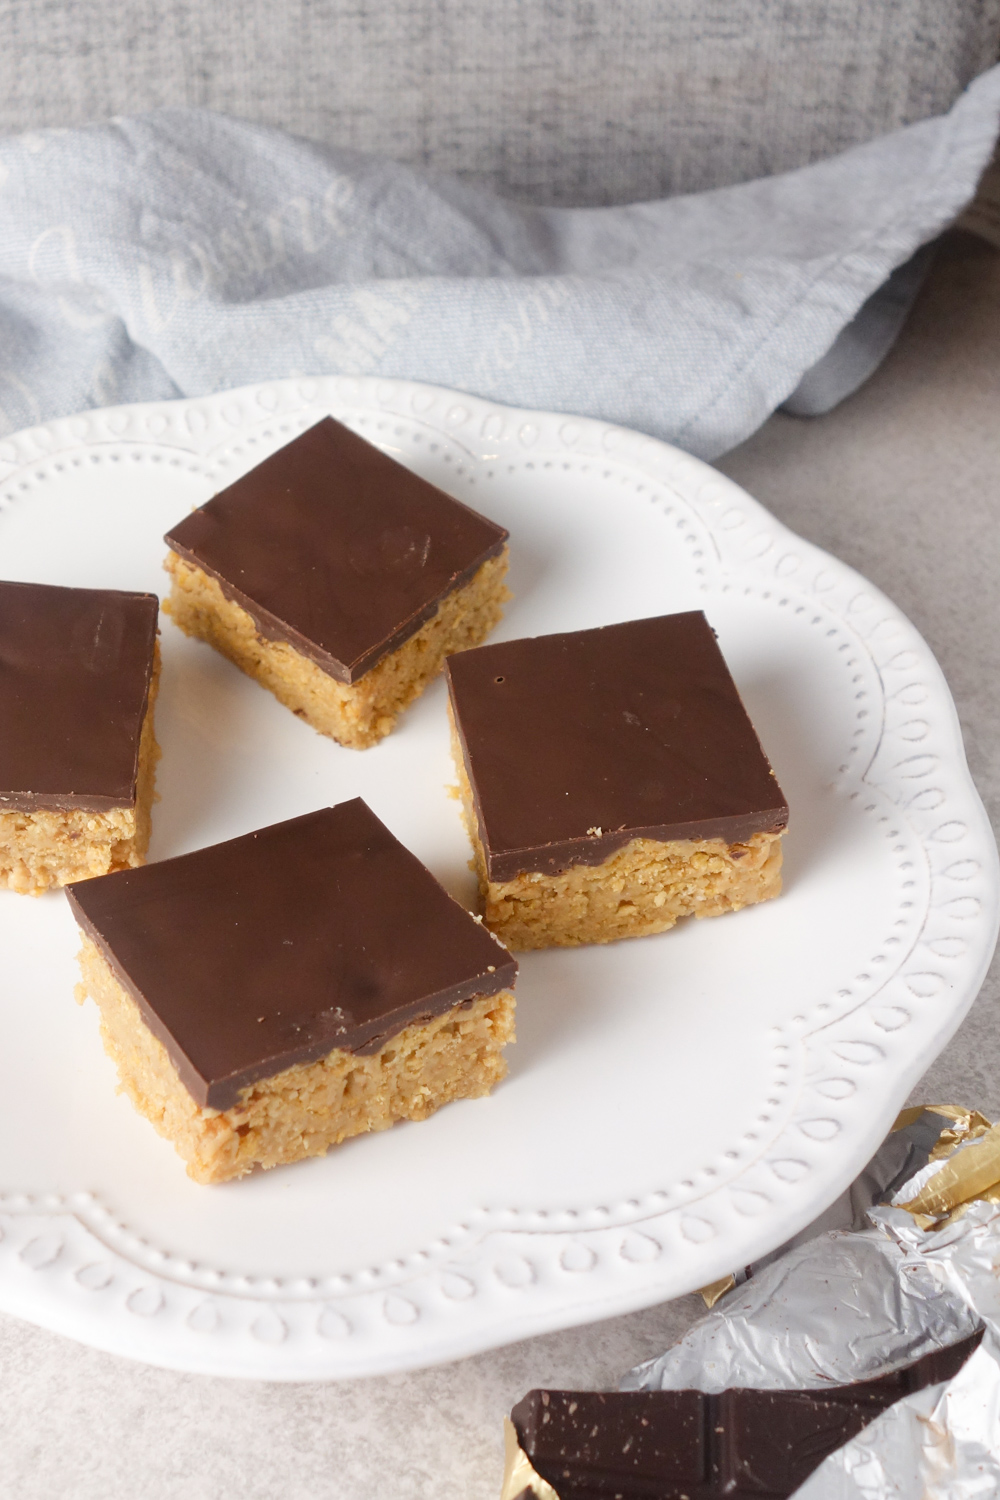 Crunchy Peanut Butter Bars: A super easy, 5 ingredient, no bake recipe for creamy & crunchy chocolate peanut butter bars. SO yum!